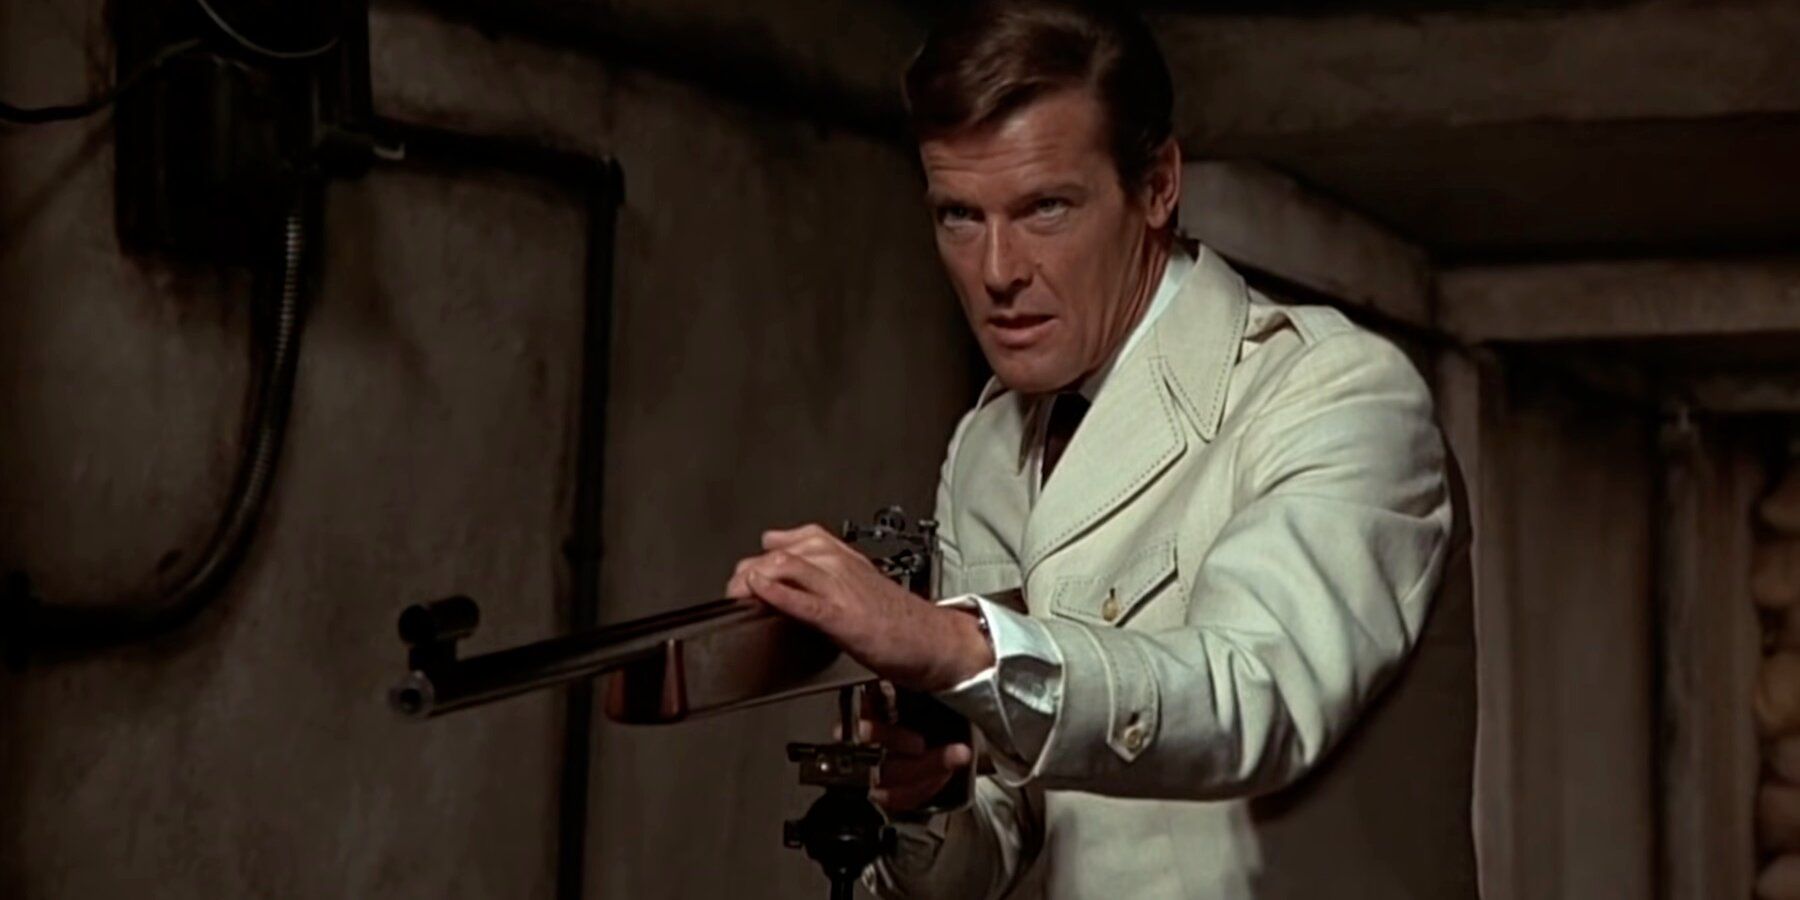 Roger Moore's James Bond uses a rifle in The Man With The Golden Gun